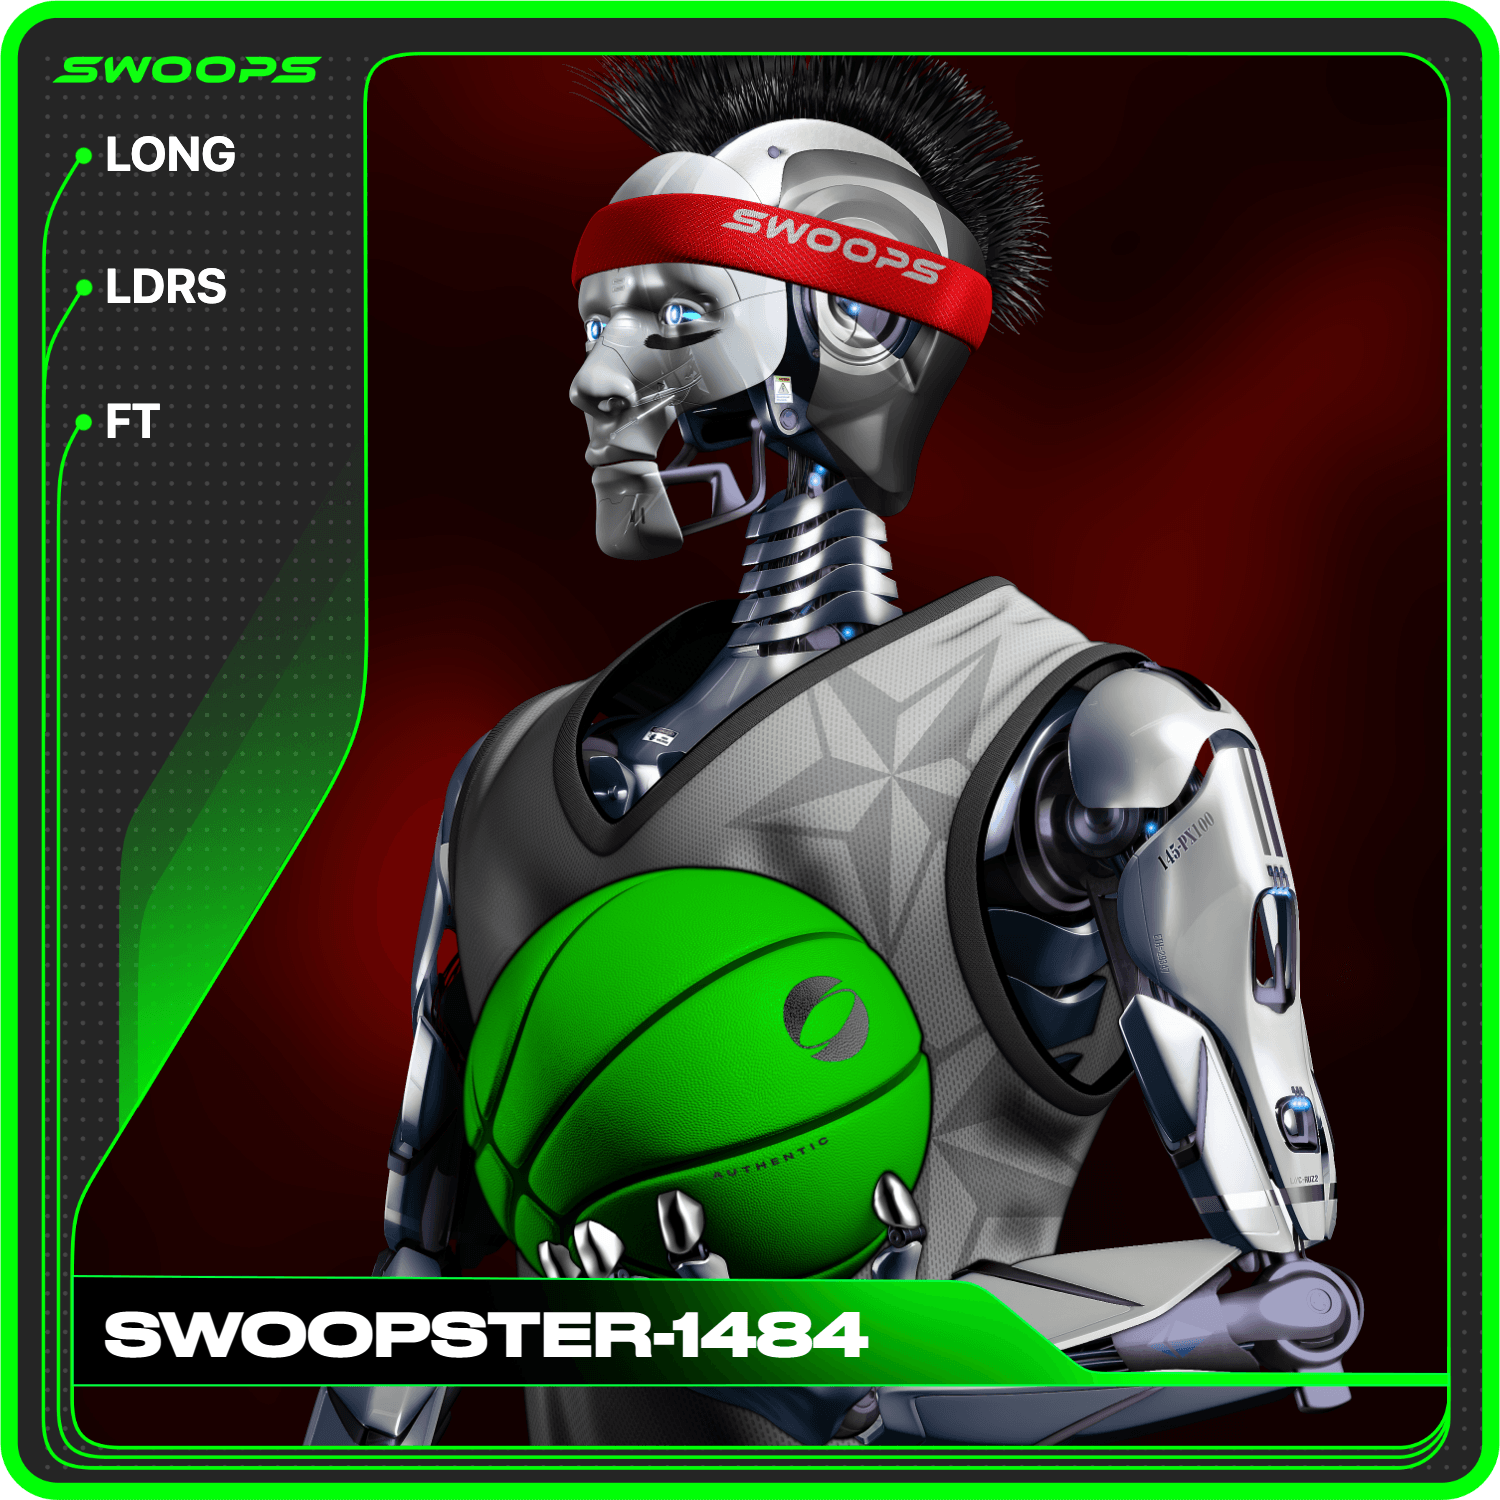 SWOOPSTER-1484